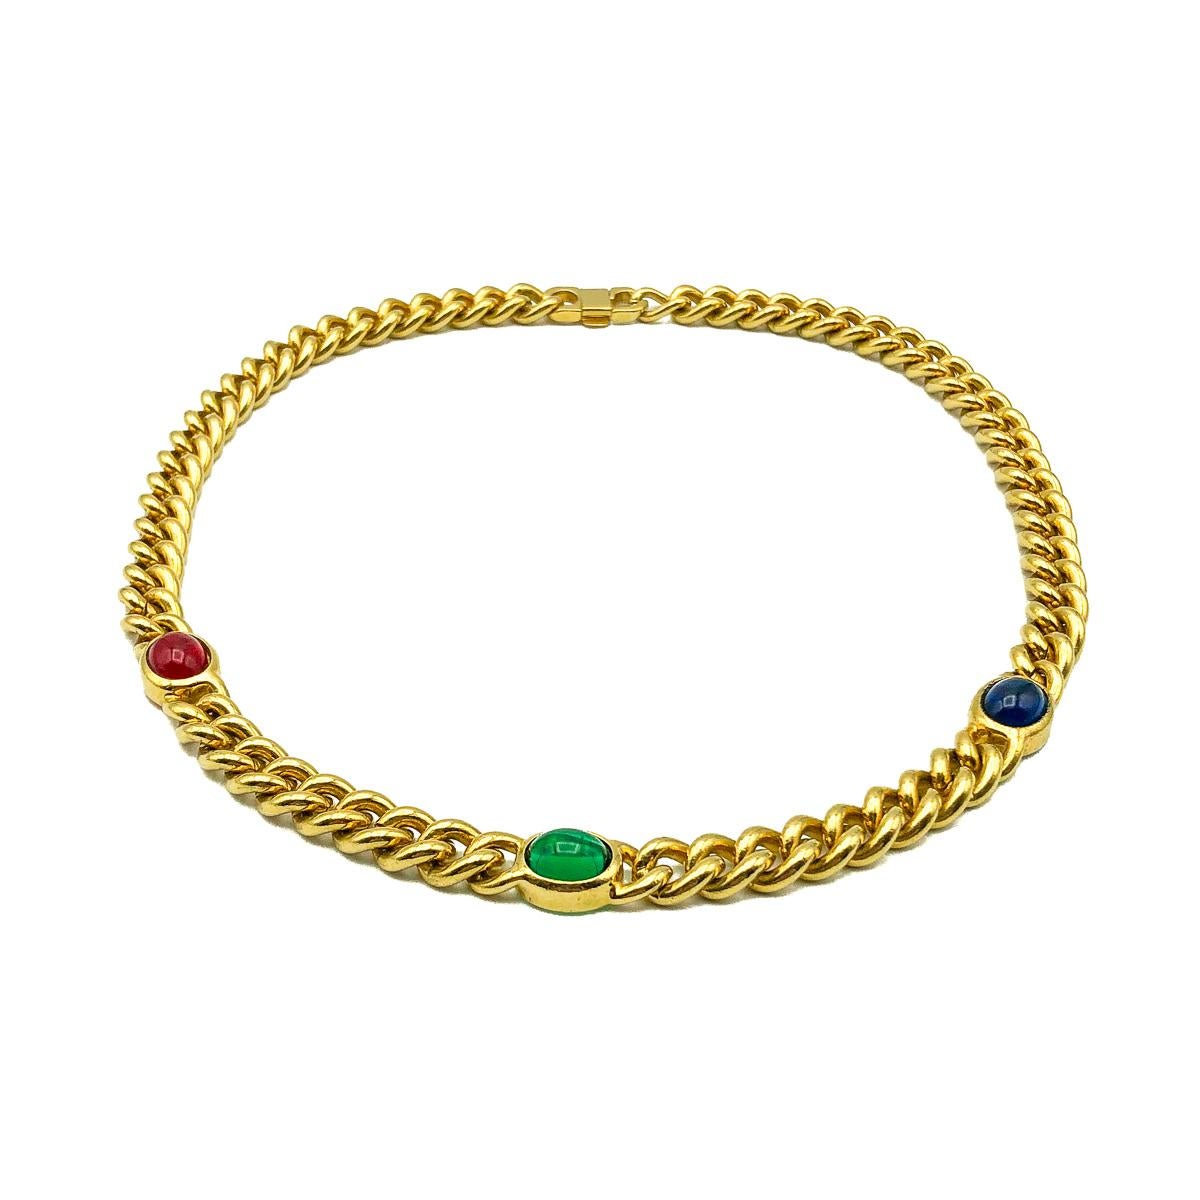 A Vintage Jewelled Chunky Chain. Crafted in gold plated metal with red, green and blue glass cabochon stones emulating sapphire, ruby and emerald. In very good vintage condition, approx. 44cm. A perfect piece to wear layered or alone that is sure to